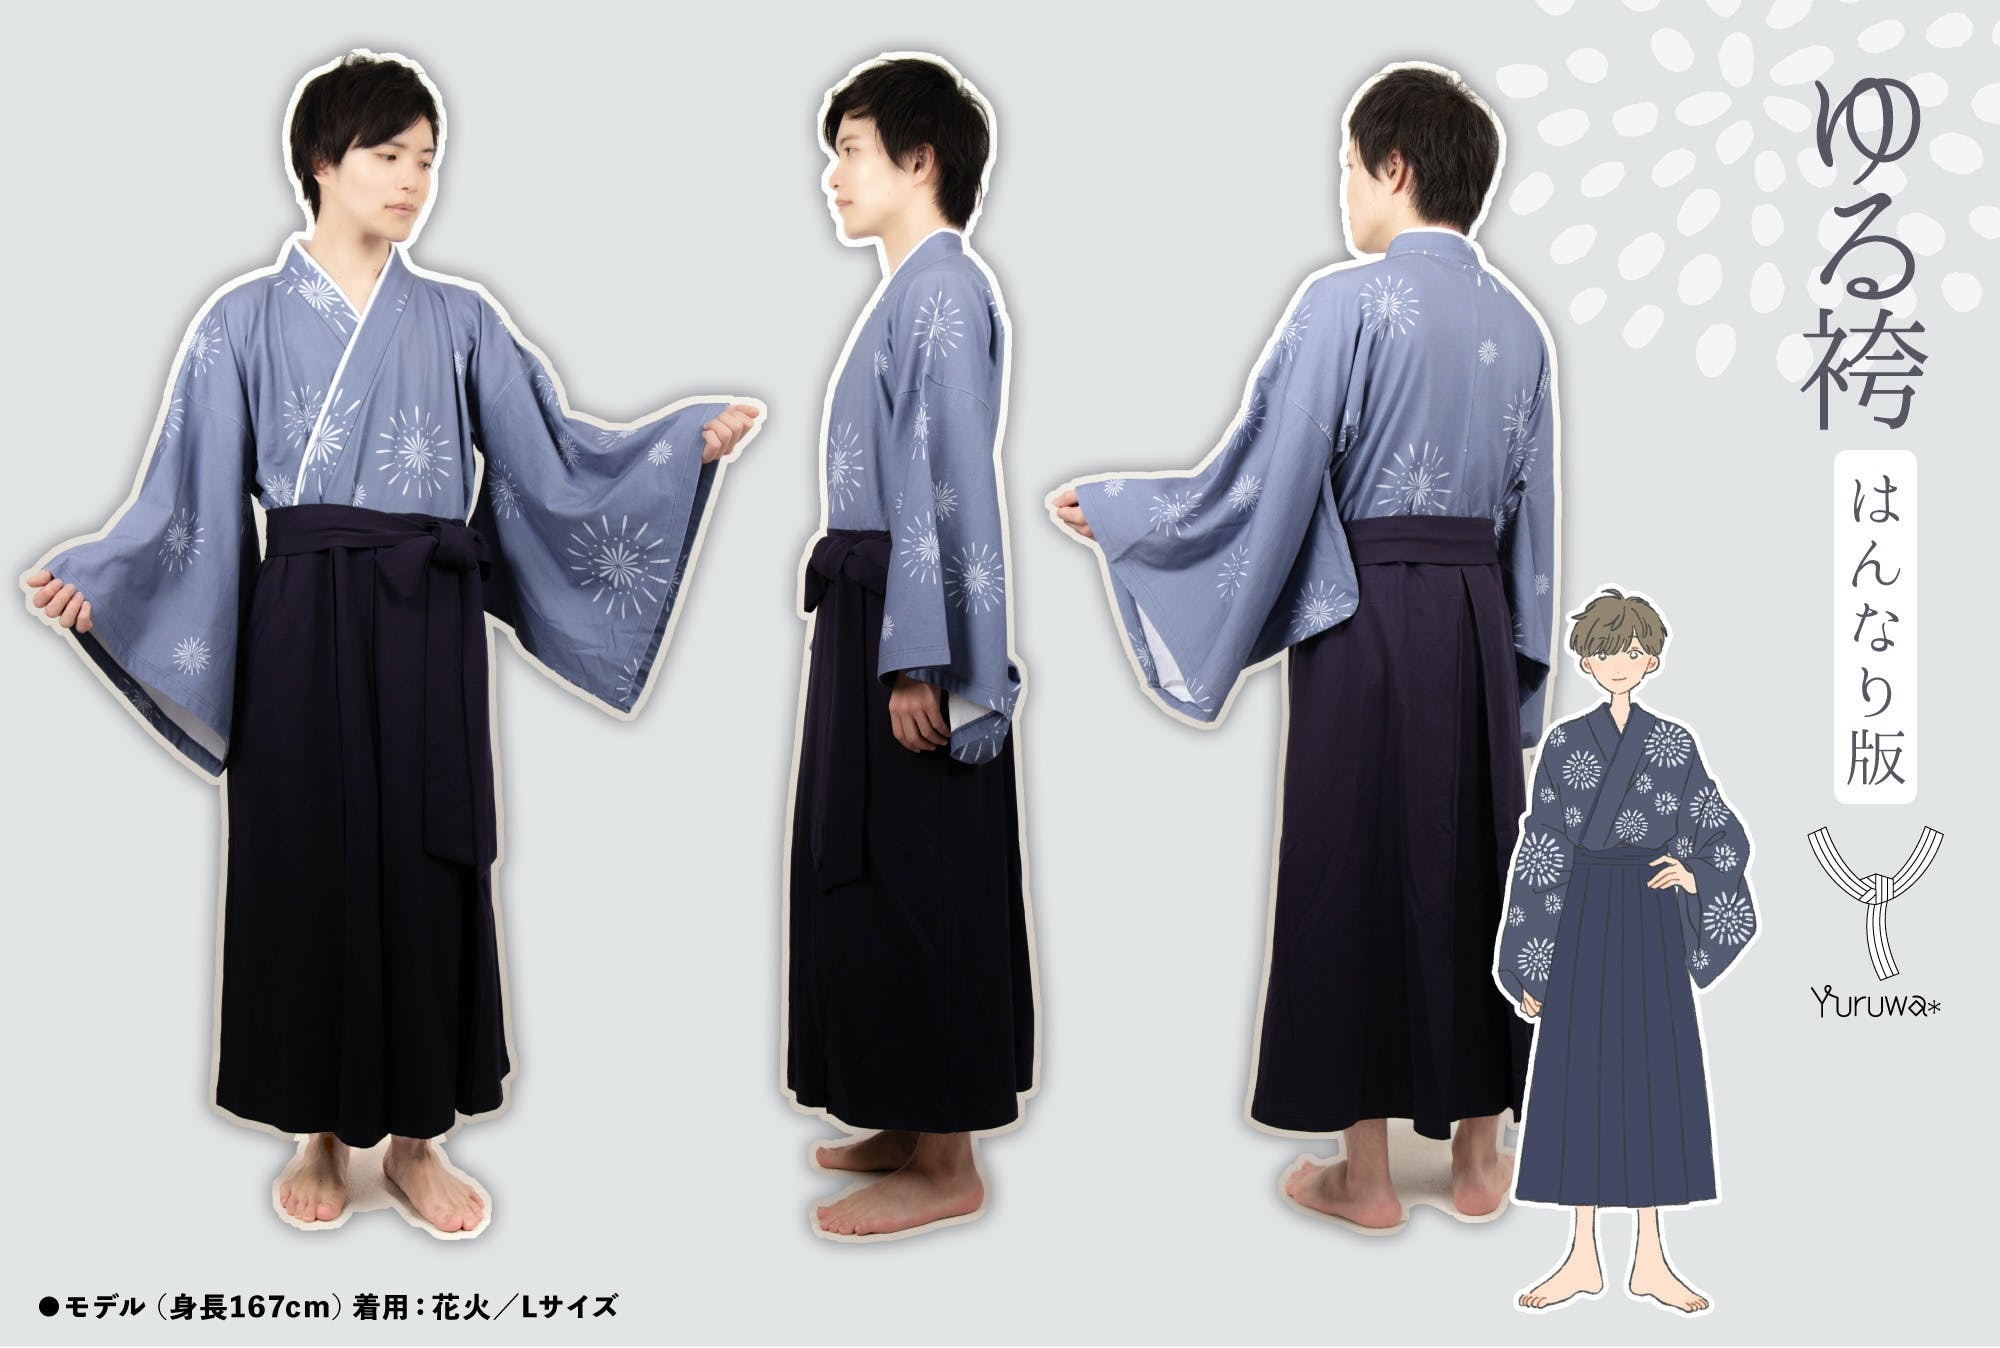 Stay home in style with Kyoto-easy hakama-inspired roomwear for men ...